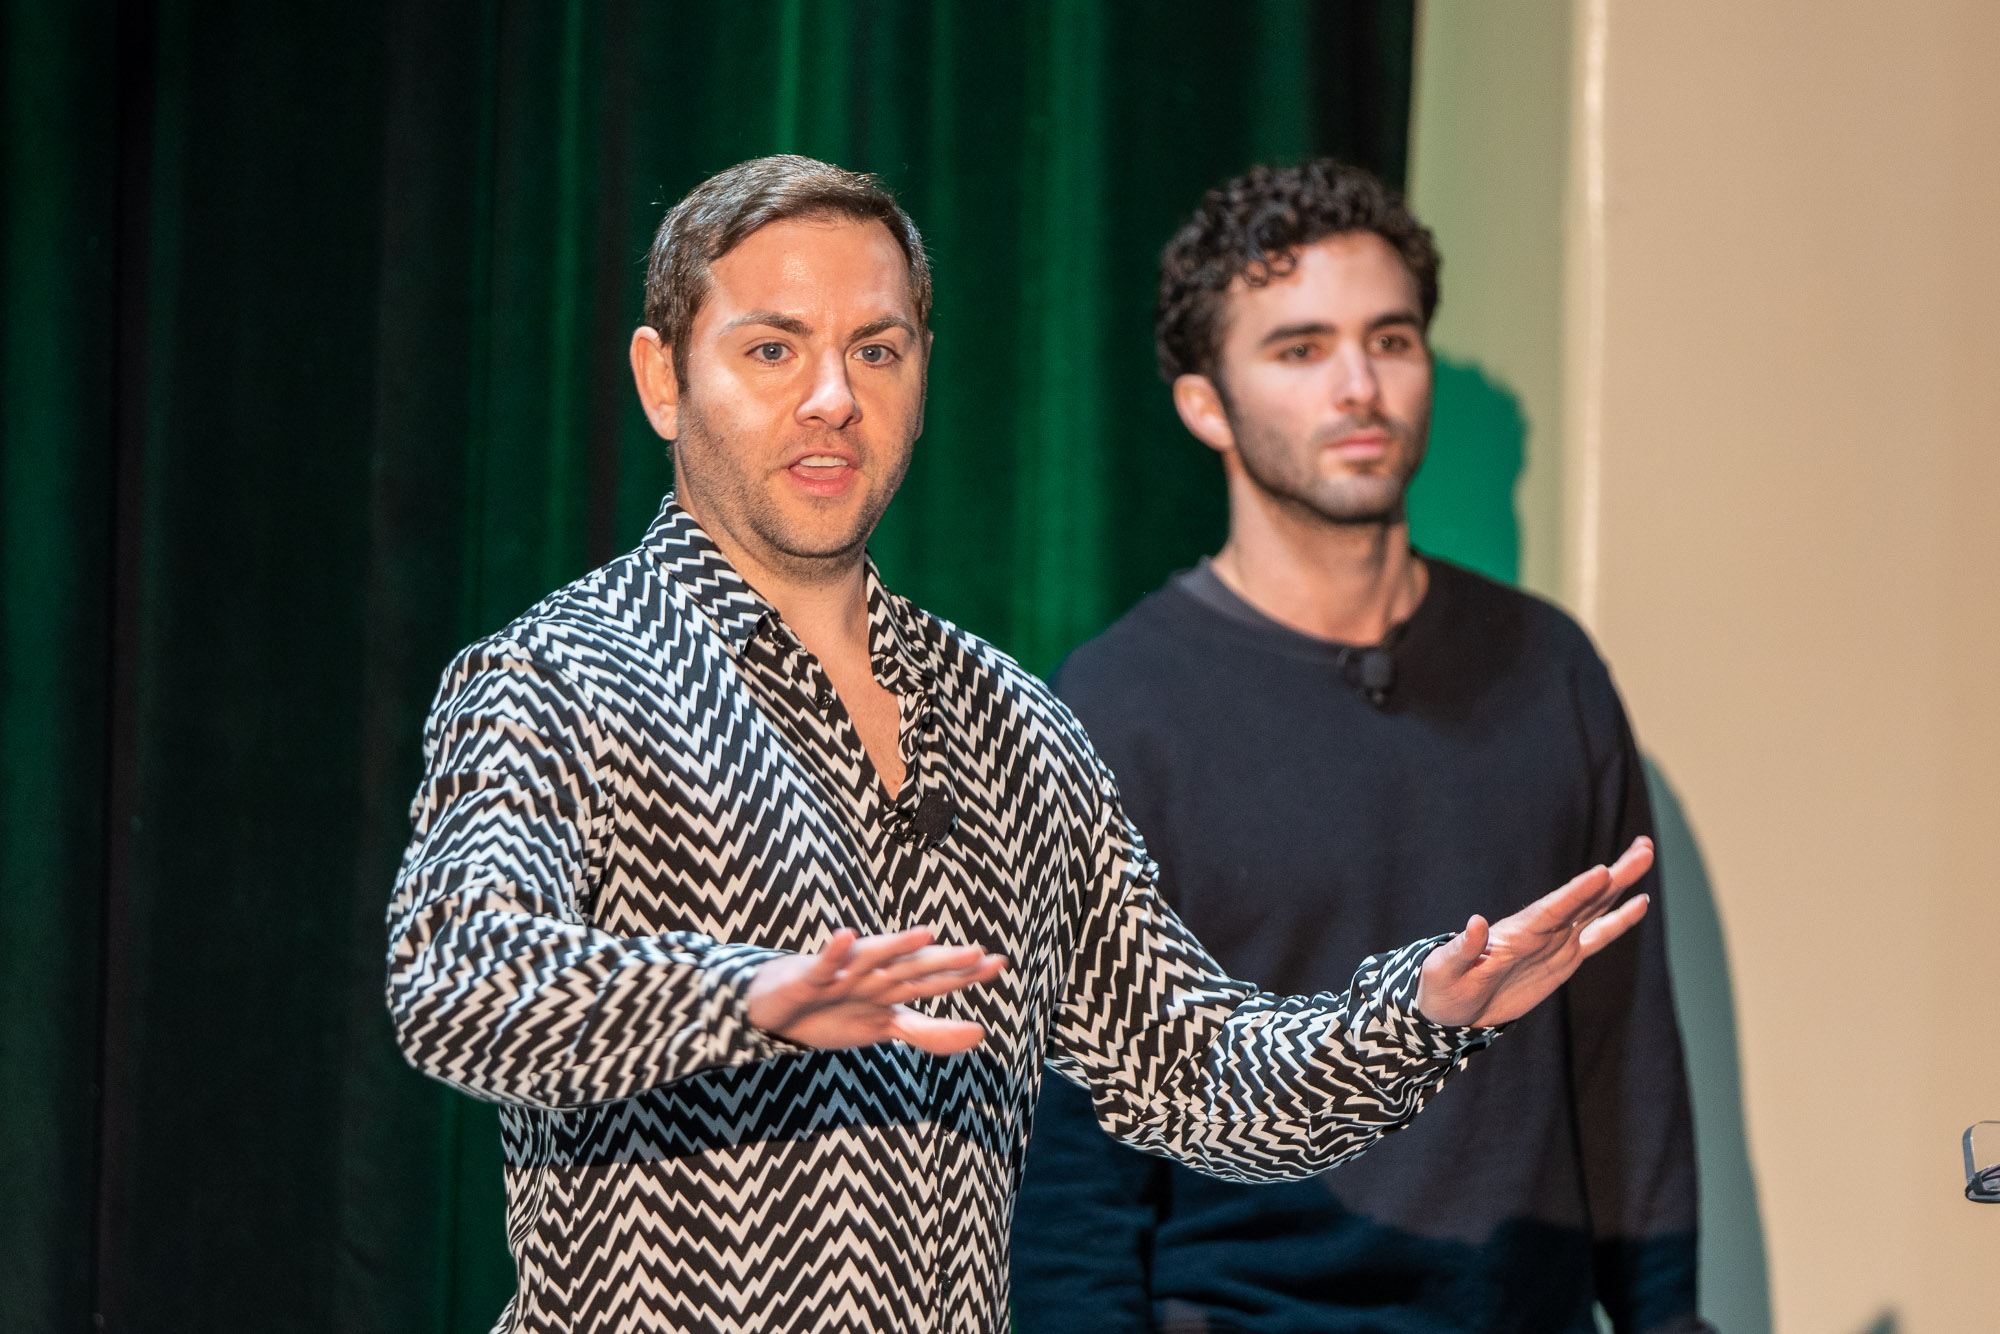 Redpoint Partner Josh Machiz and Redpoint Head of Content Rashad Assir talk about 